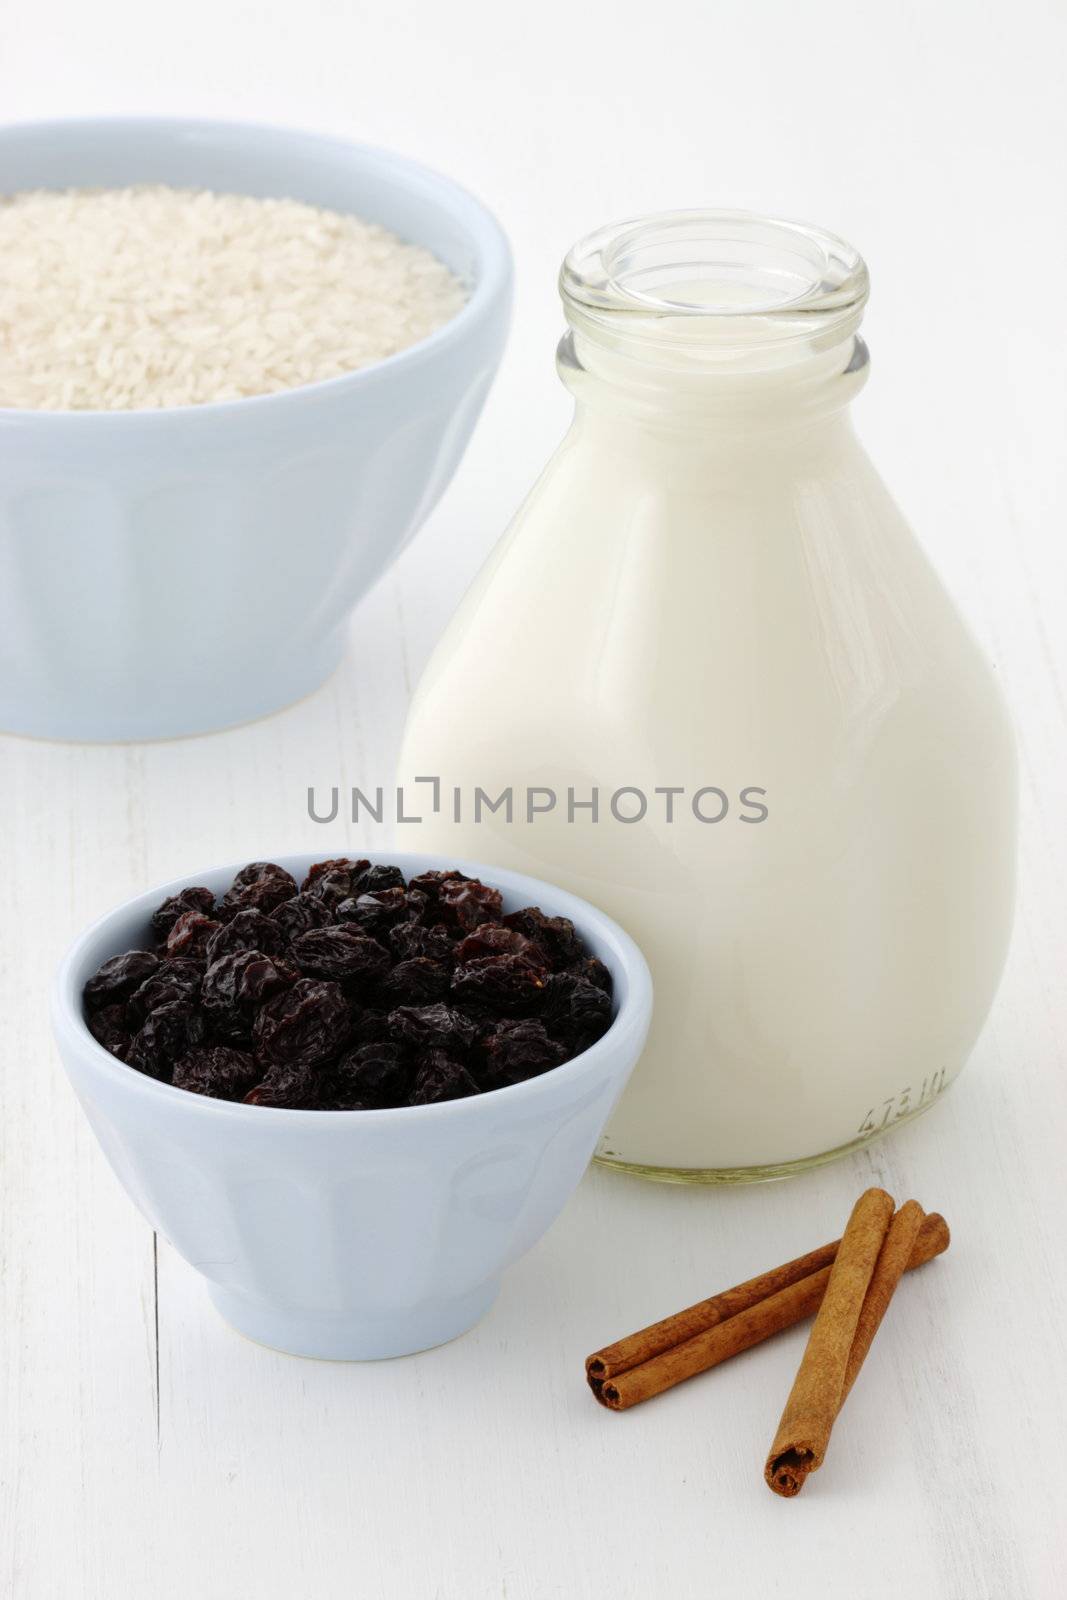 Rice pudding ingredients by tacar